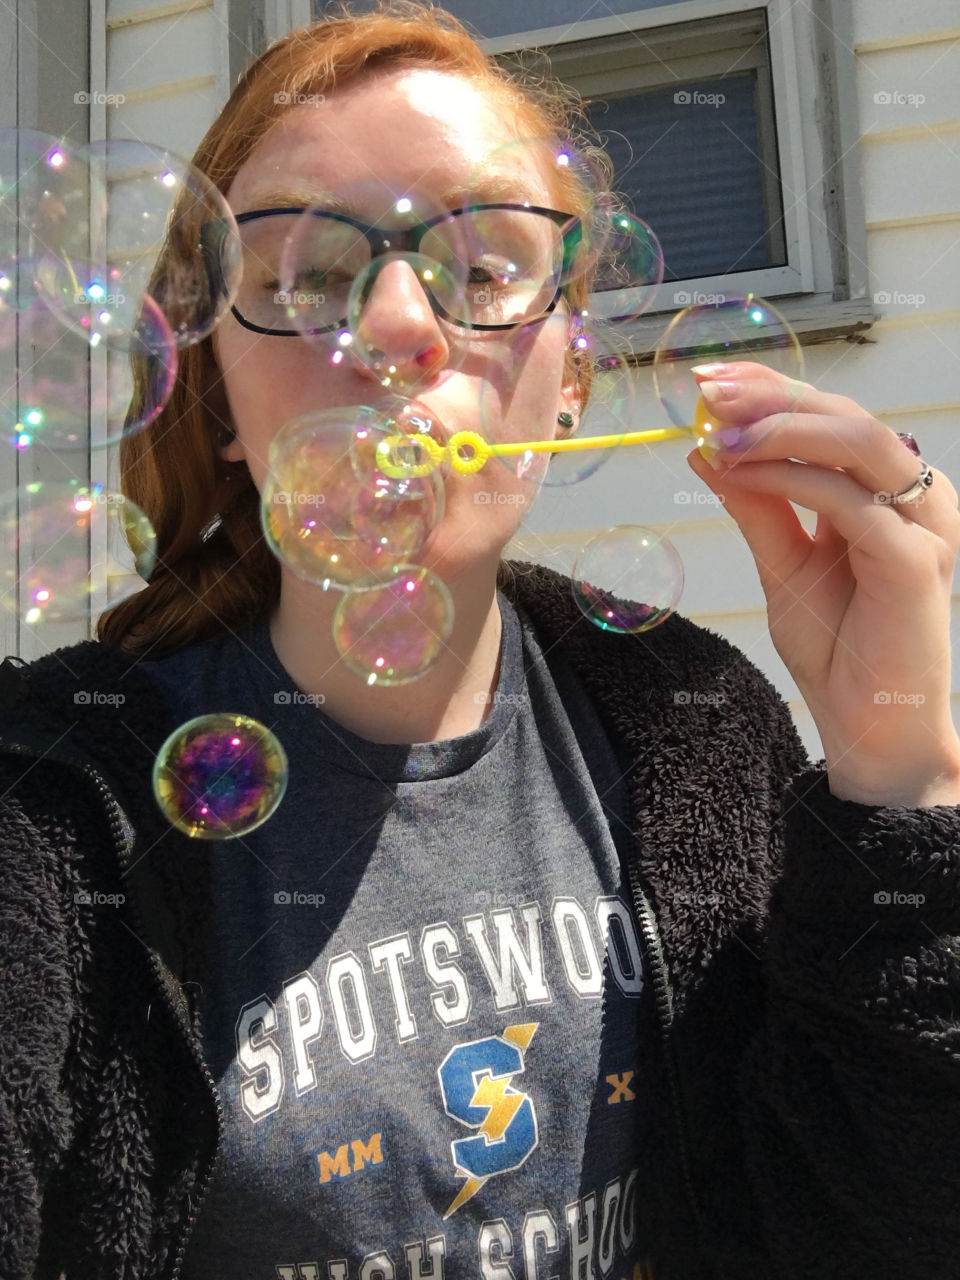 girl blowing bubbles
red hair, blue eyes, glasses, wick